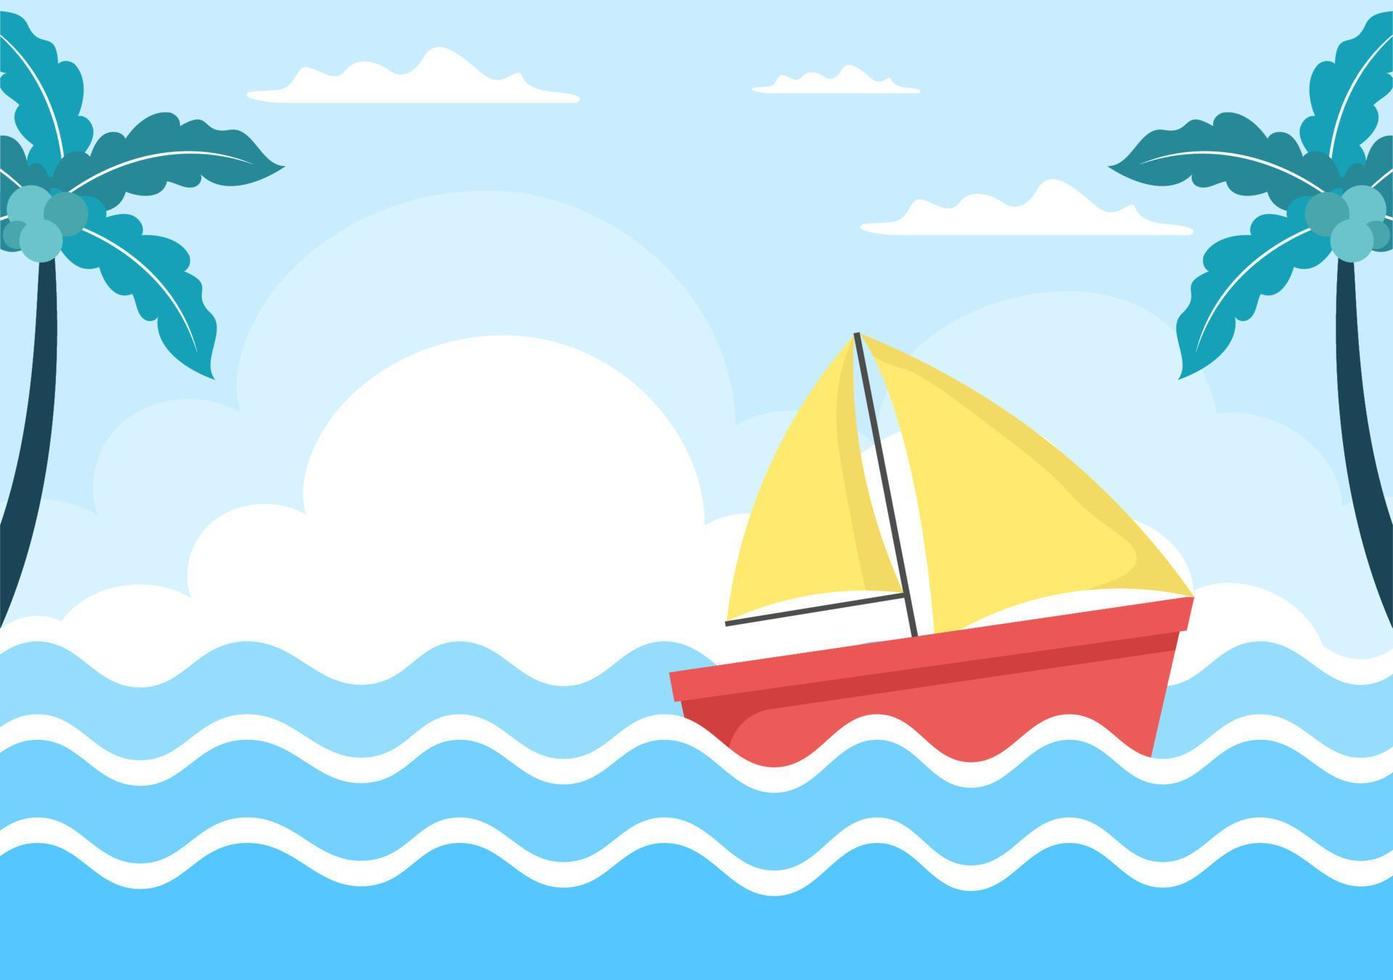 Sailing Boat with Sea or Lake View Illustration vector